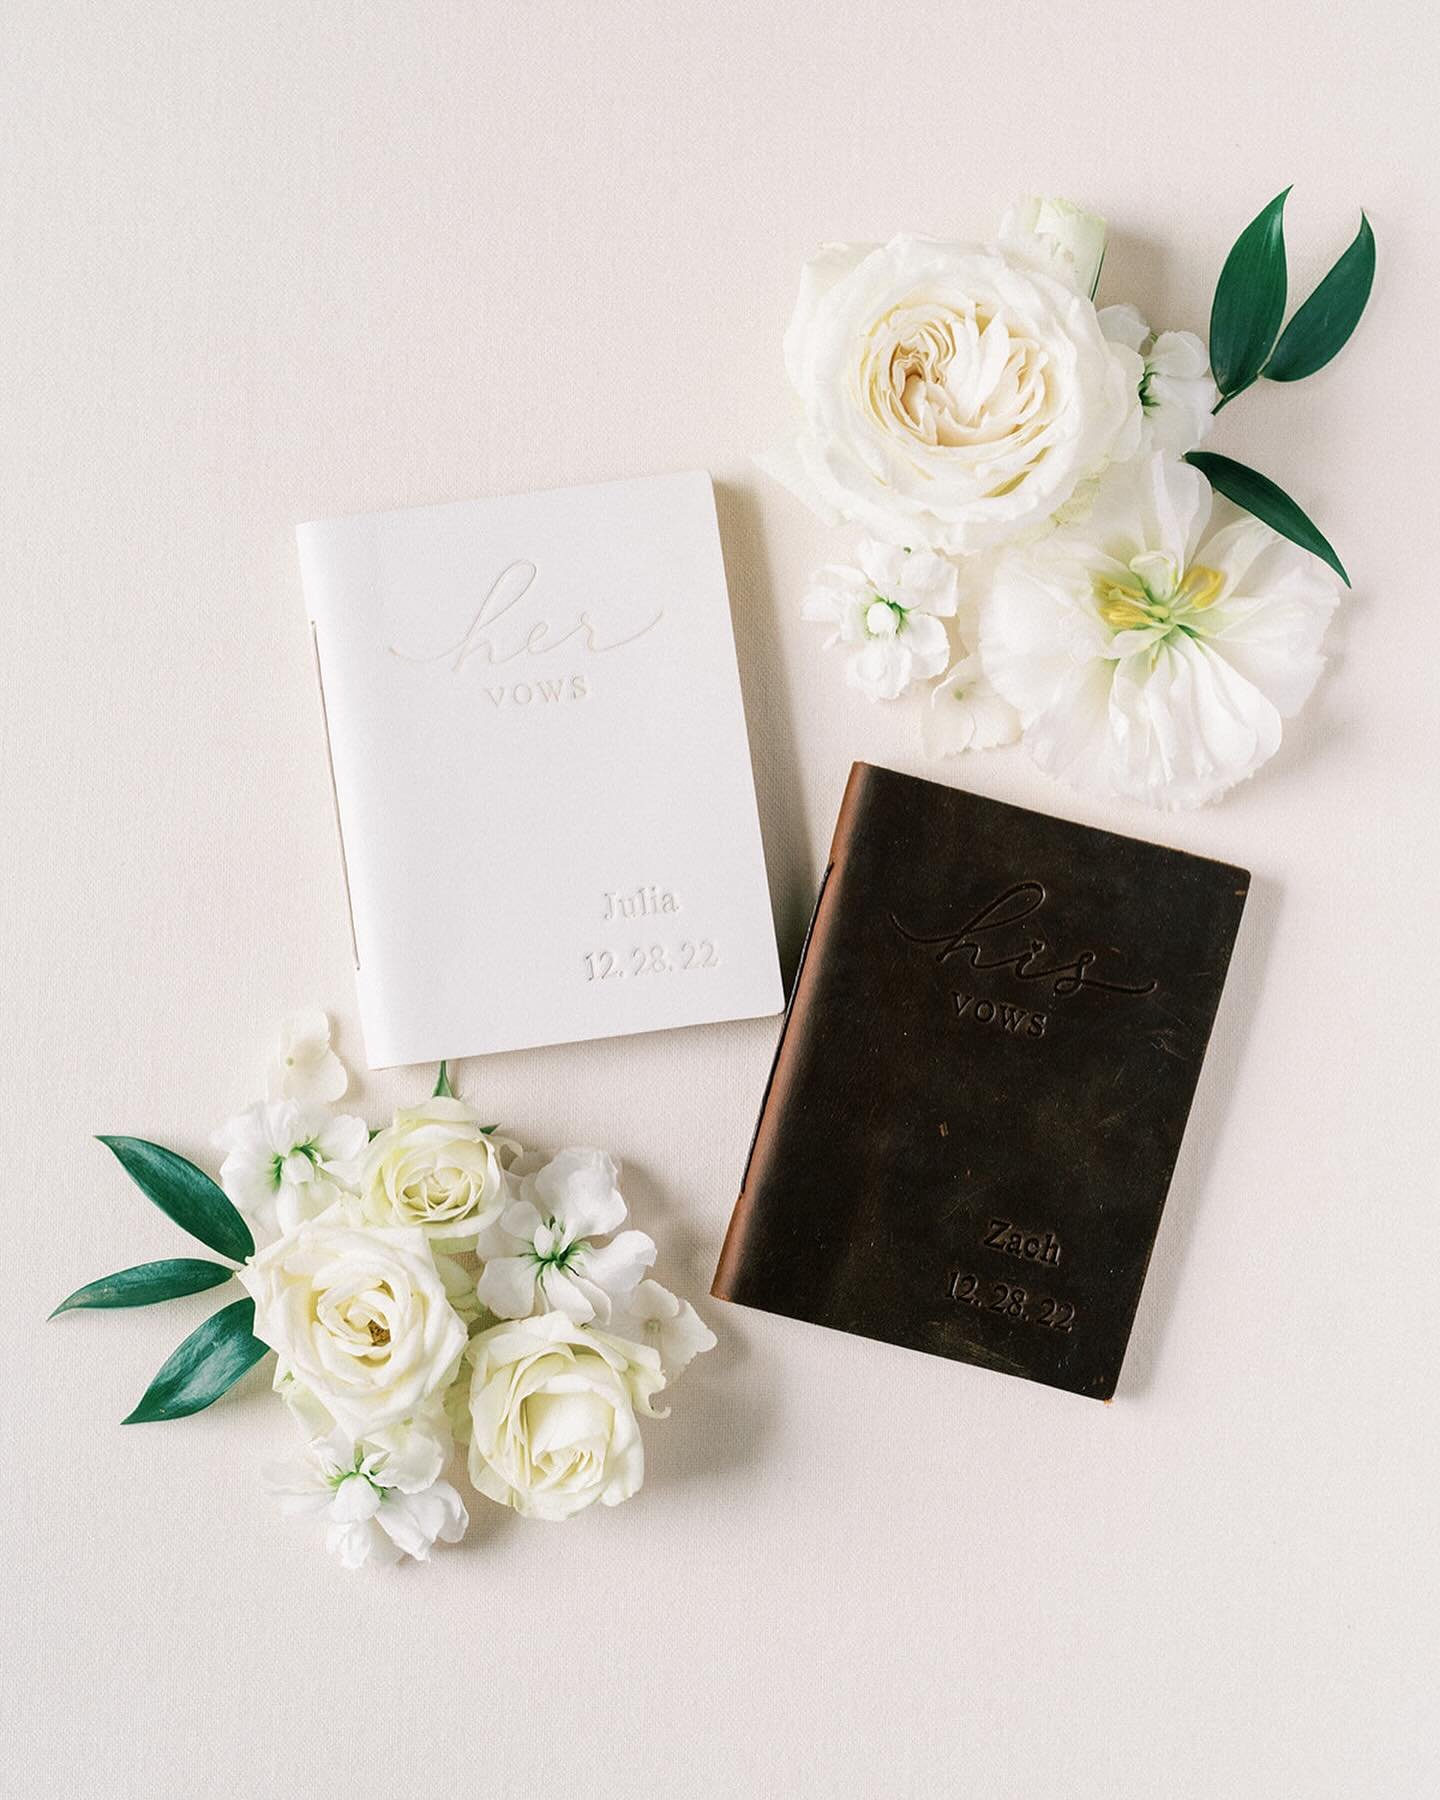 Let&rsquo;s talk vow books! 📖💍

Vow books are among one of my favorite details to photograph. They hold the essence of the wedding&mdash;the promises couples make to each other. It immortalizes their commitment in their own beautiful words, creatin